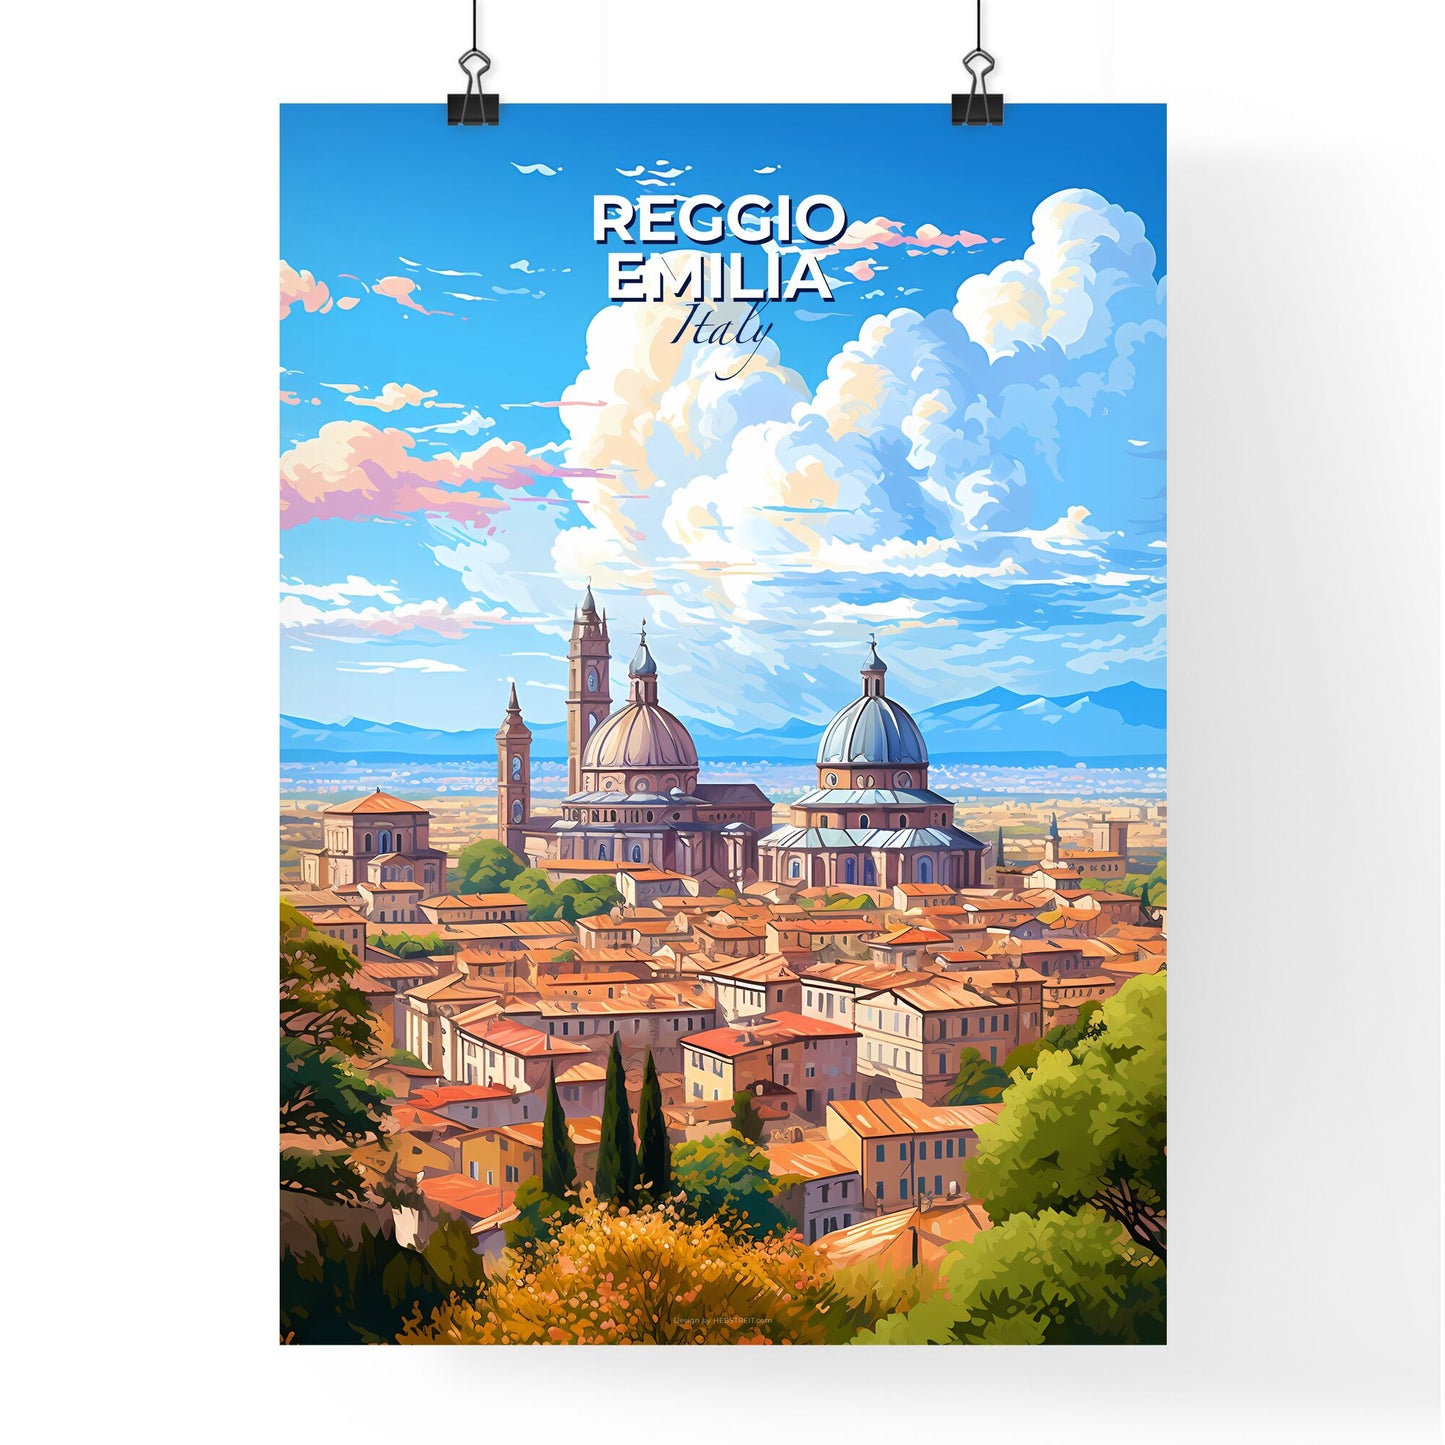 Reggio Emilia Italy Skyline - A City With A Dome Shaped Building - Customizable Travel Gift Default Title